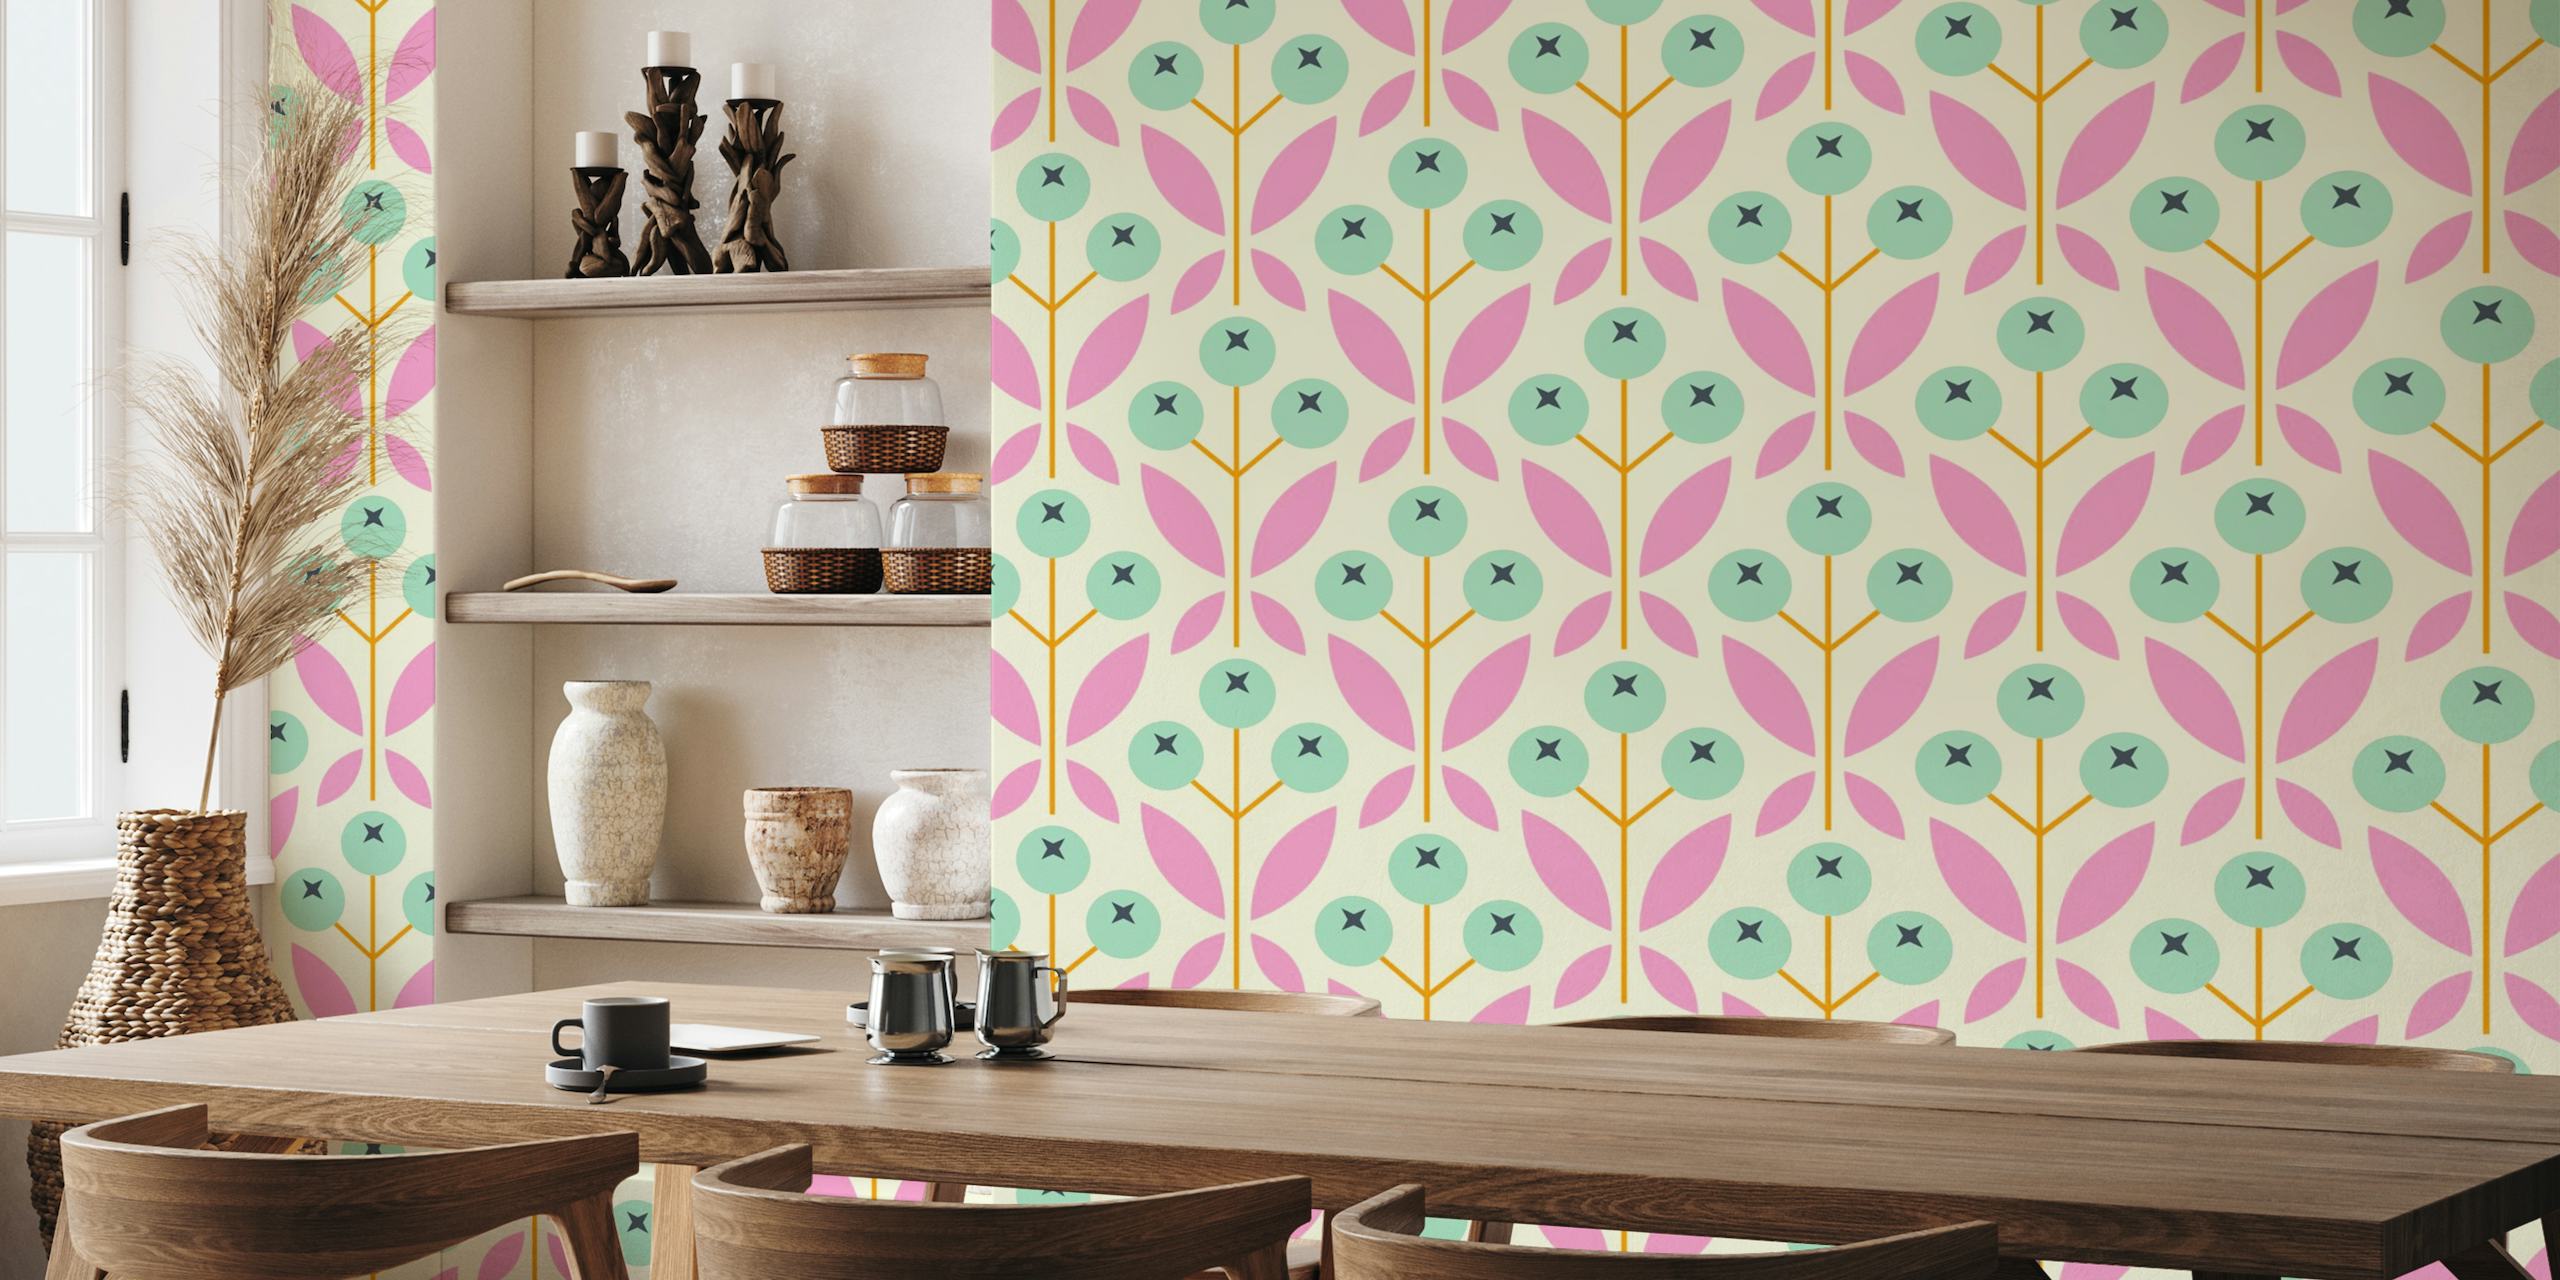 Geometric Yellow Berries wall mural with yellow, pink, teal, and white color scheme